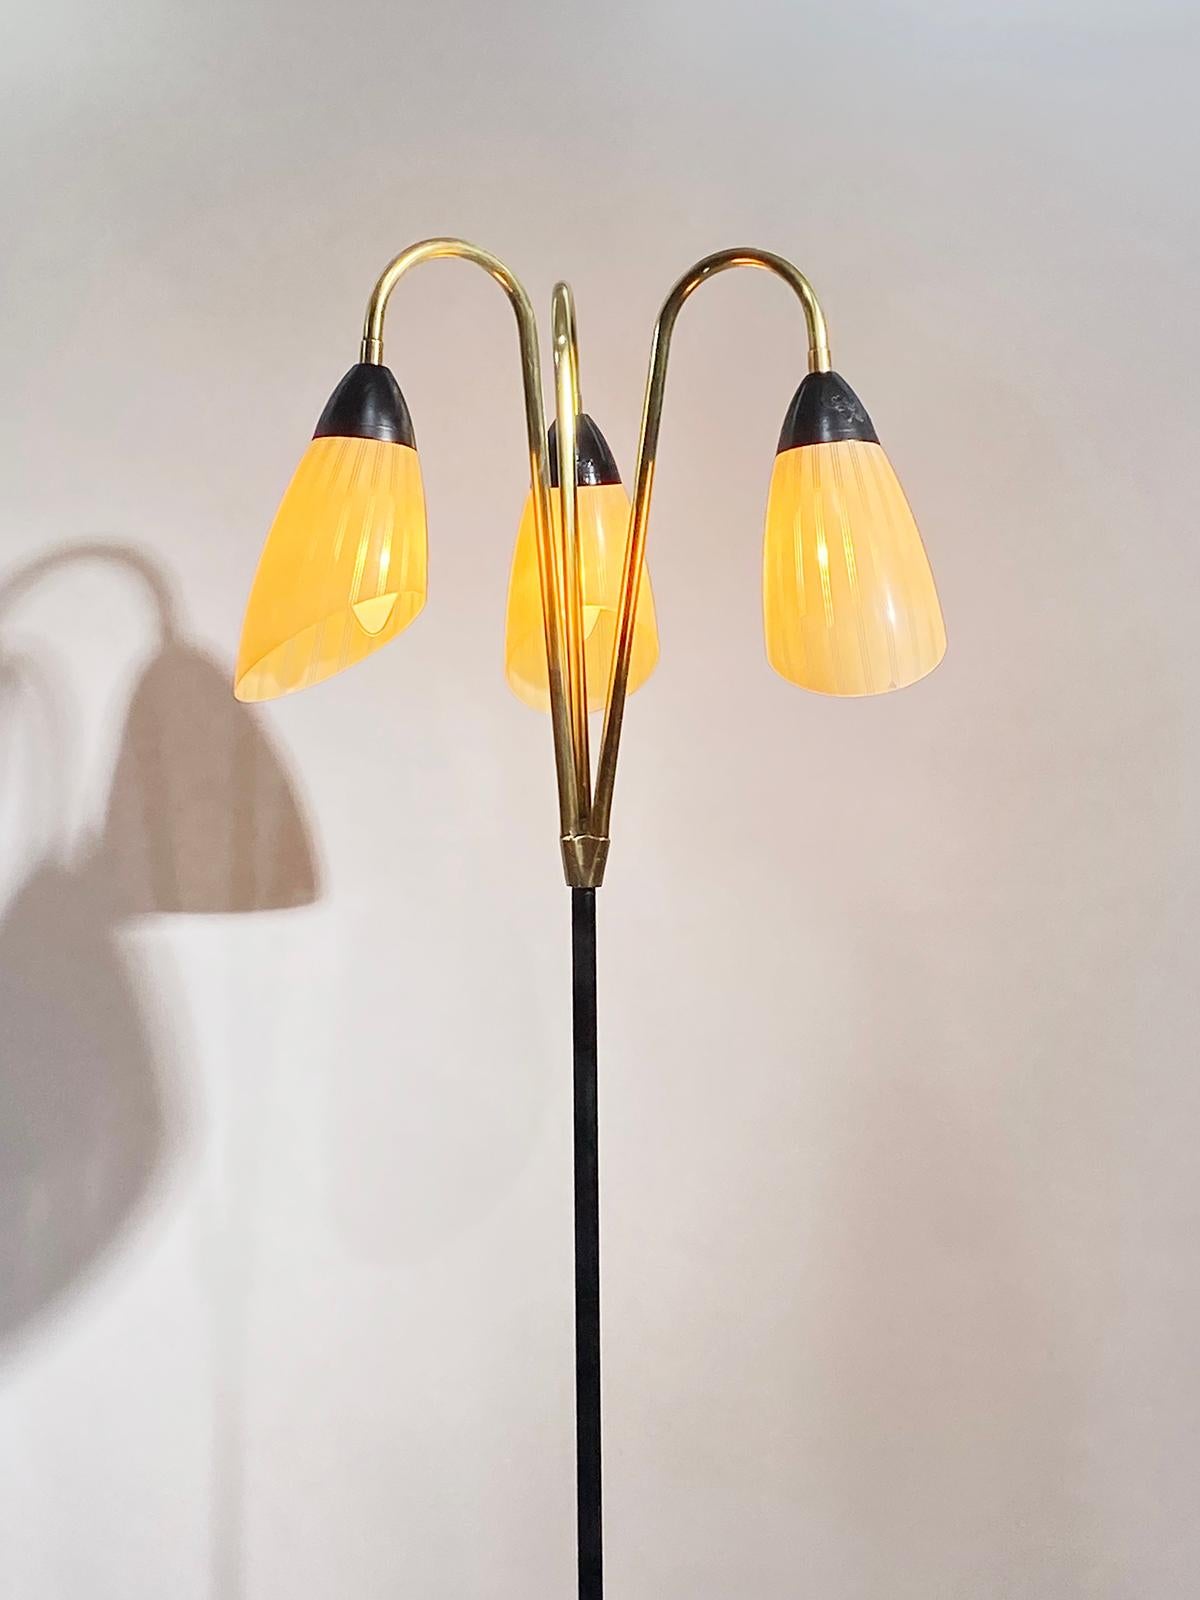 Beautiful mid-century floor lamp, in the style of Stilnovo featuring three tulip glass shades, on a brass and black metal structure.